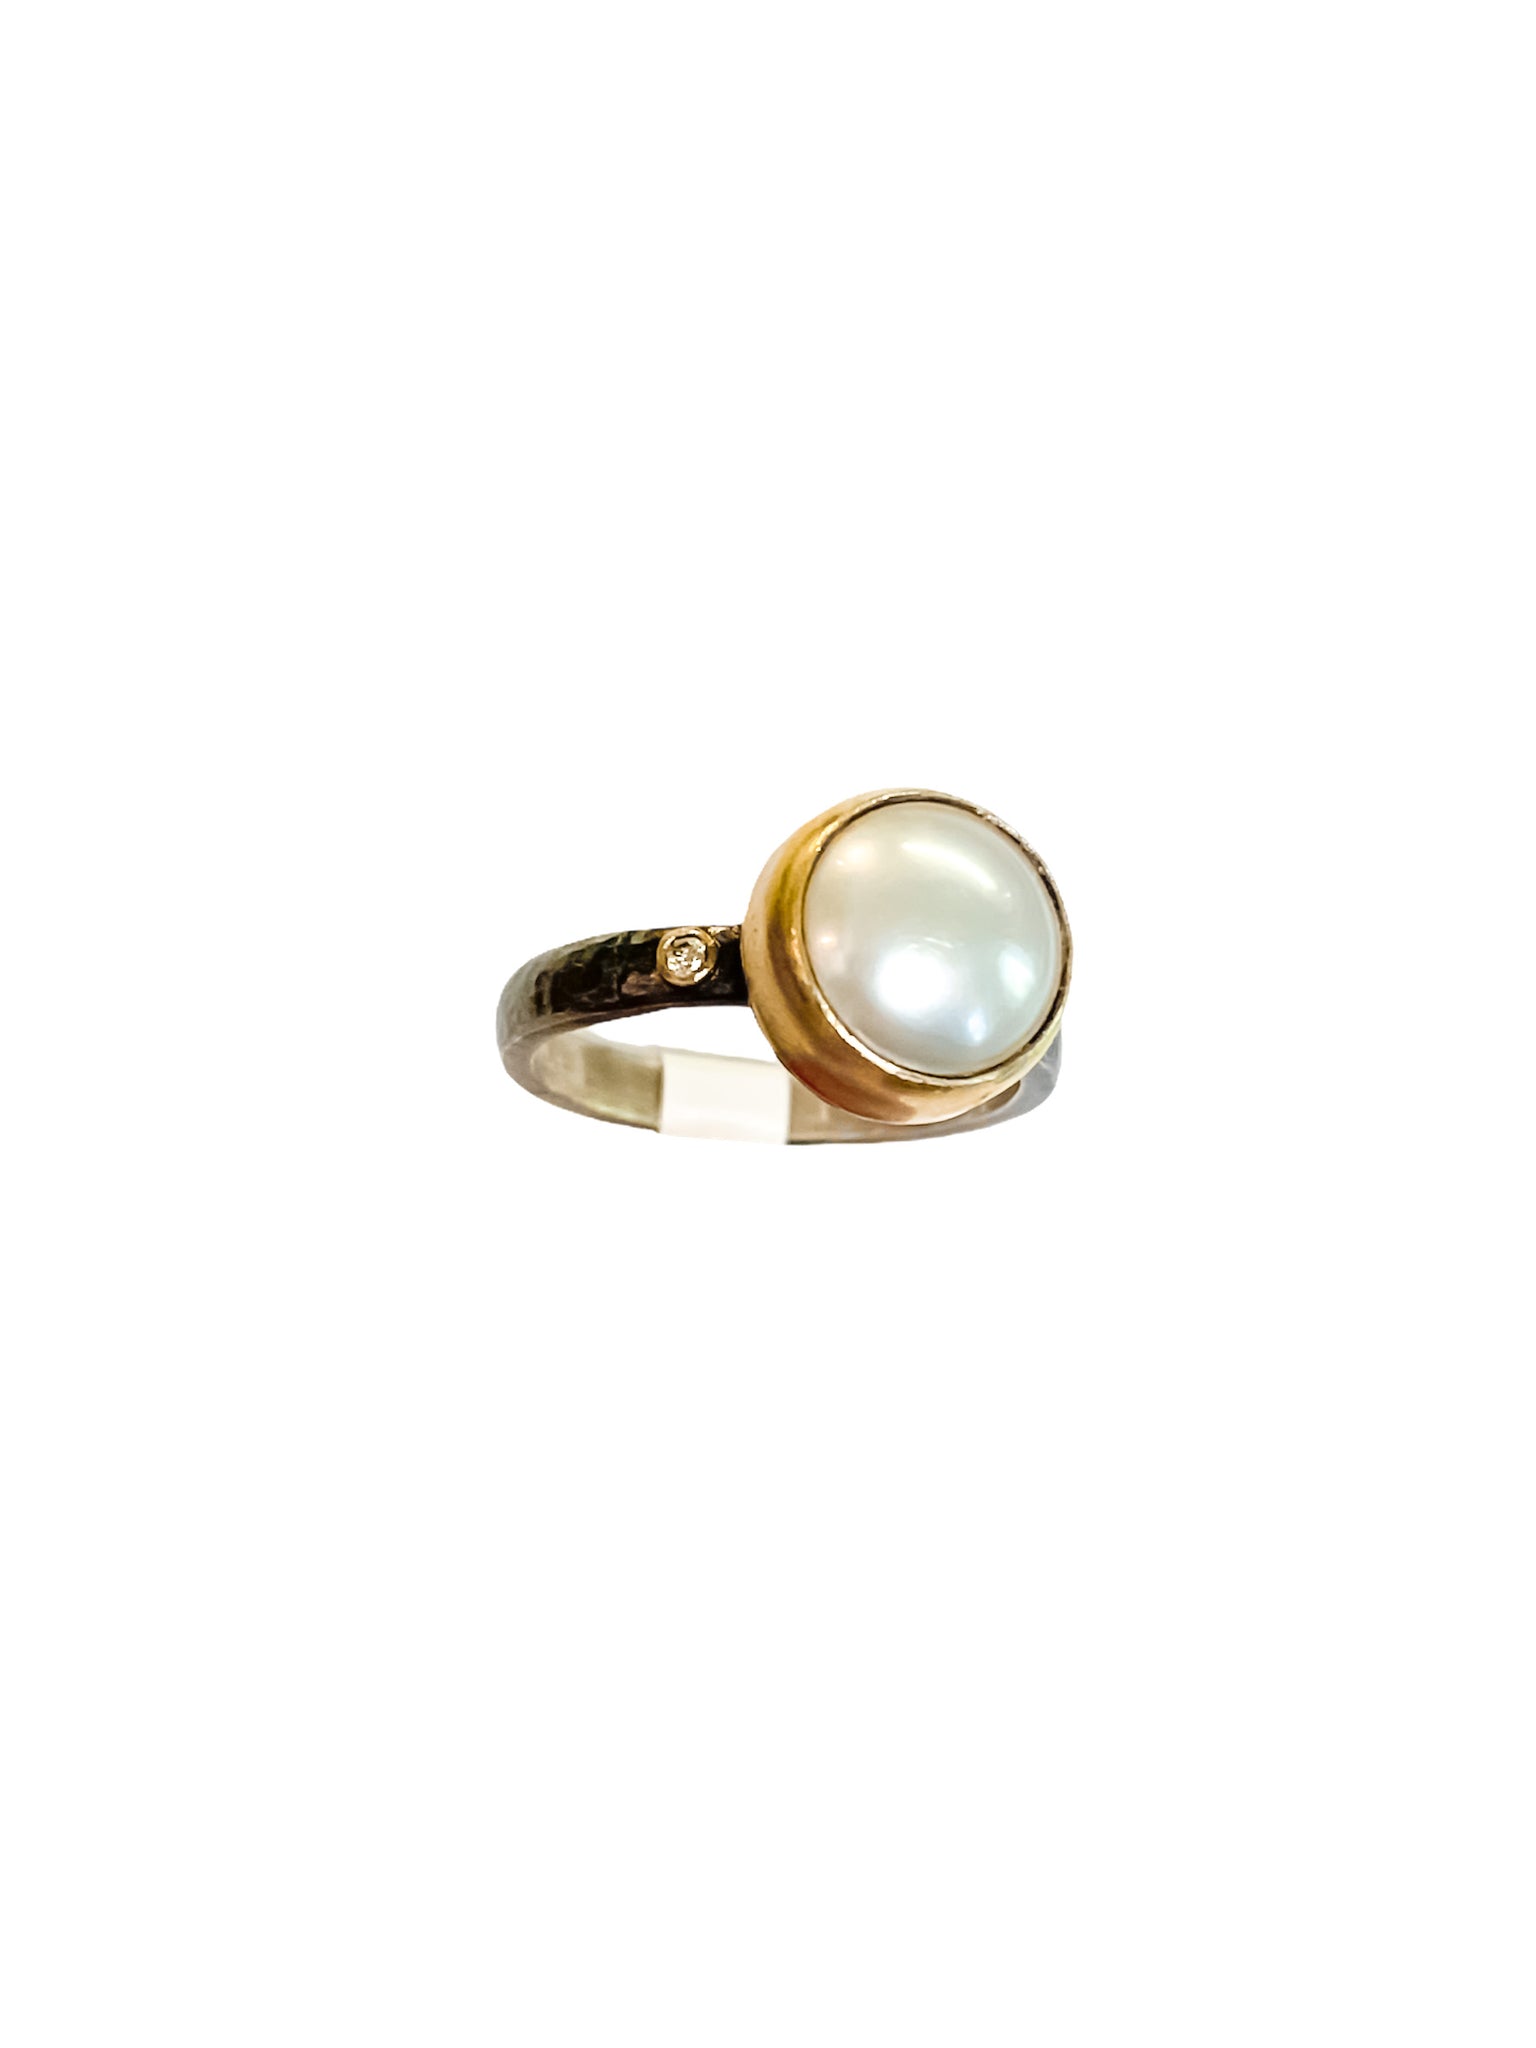 Pearl ring with a diamonds